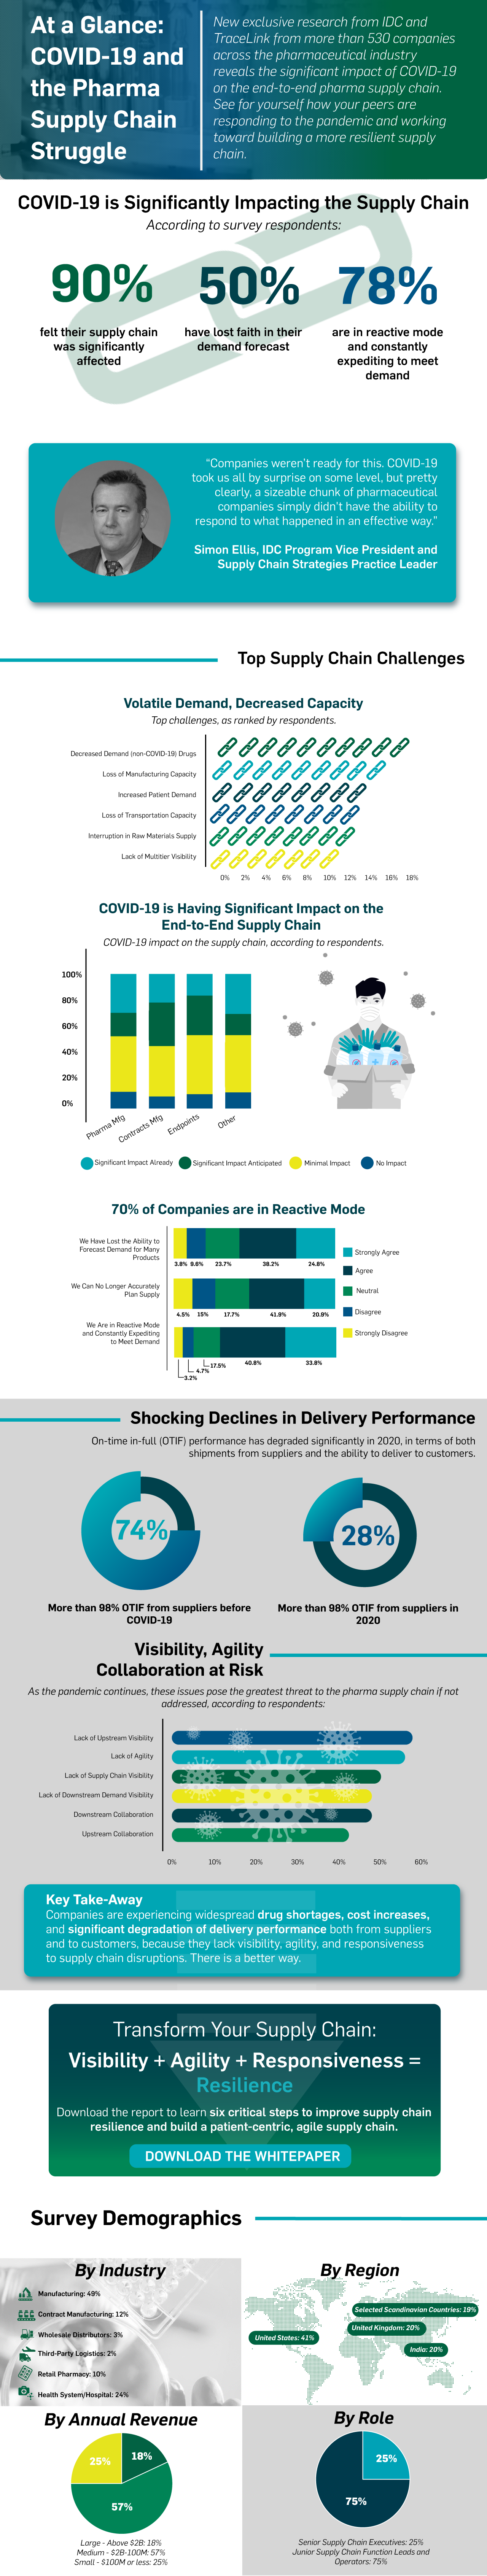 Infographic of key findings from 2020 IDC and TraceLink Pharma Supply Chain Survey